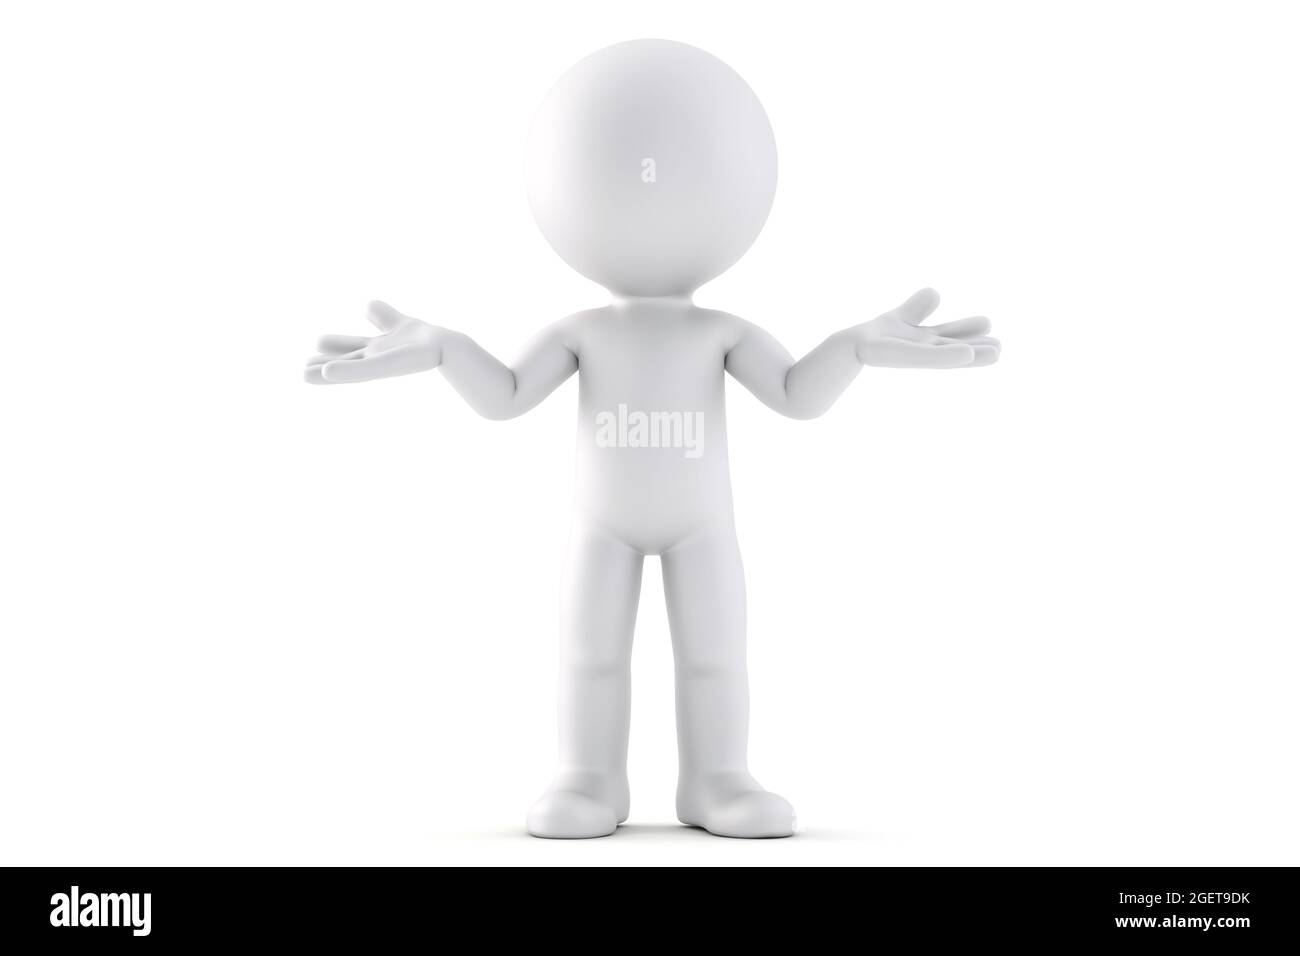 Doubter. 3D illustration. Isolated over white background Stock Photo